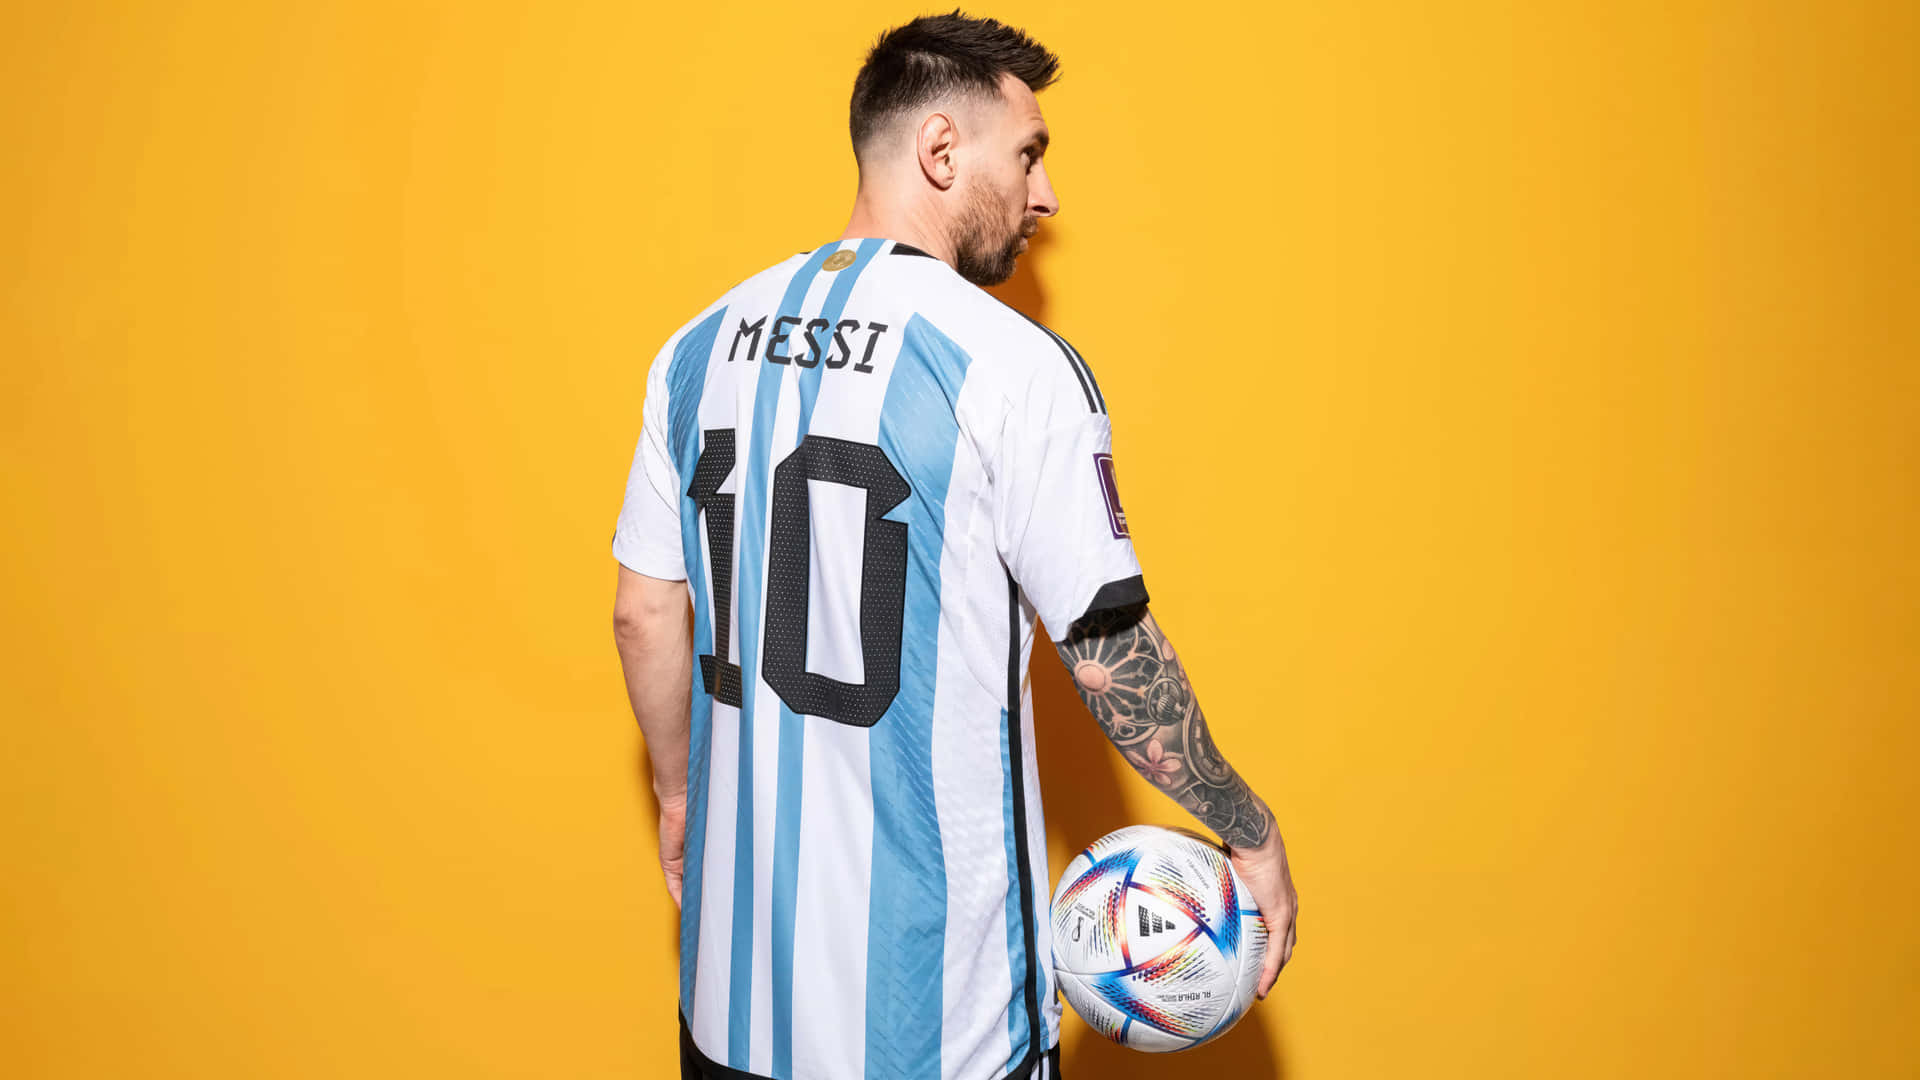 Messi - Soccer Legend and GOAT